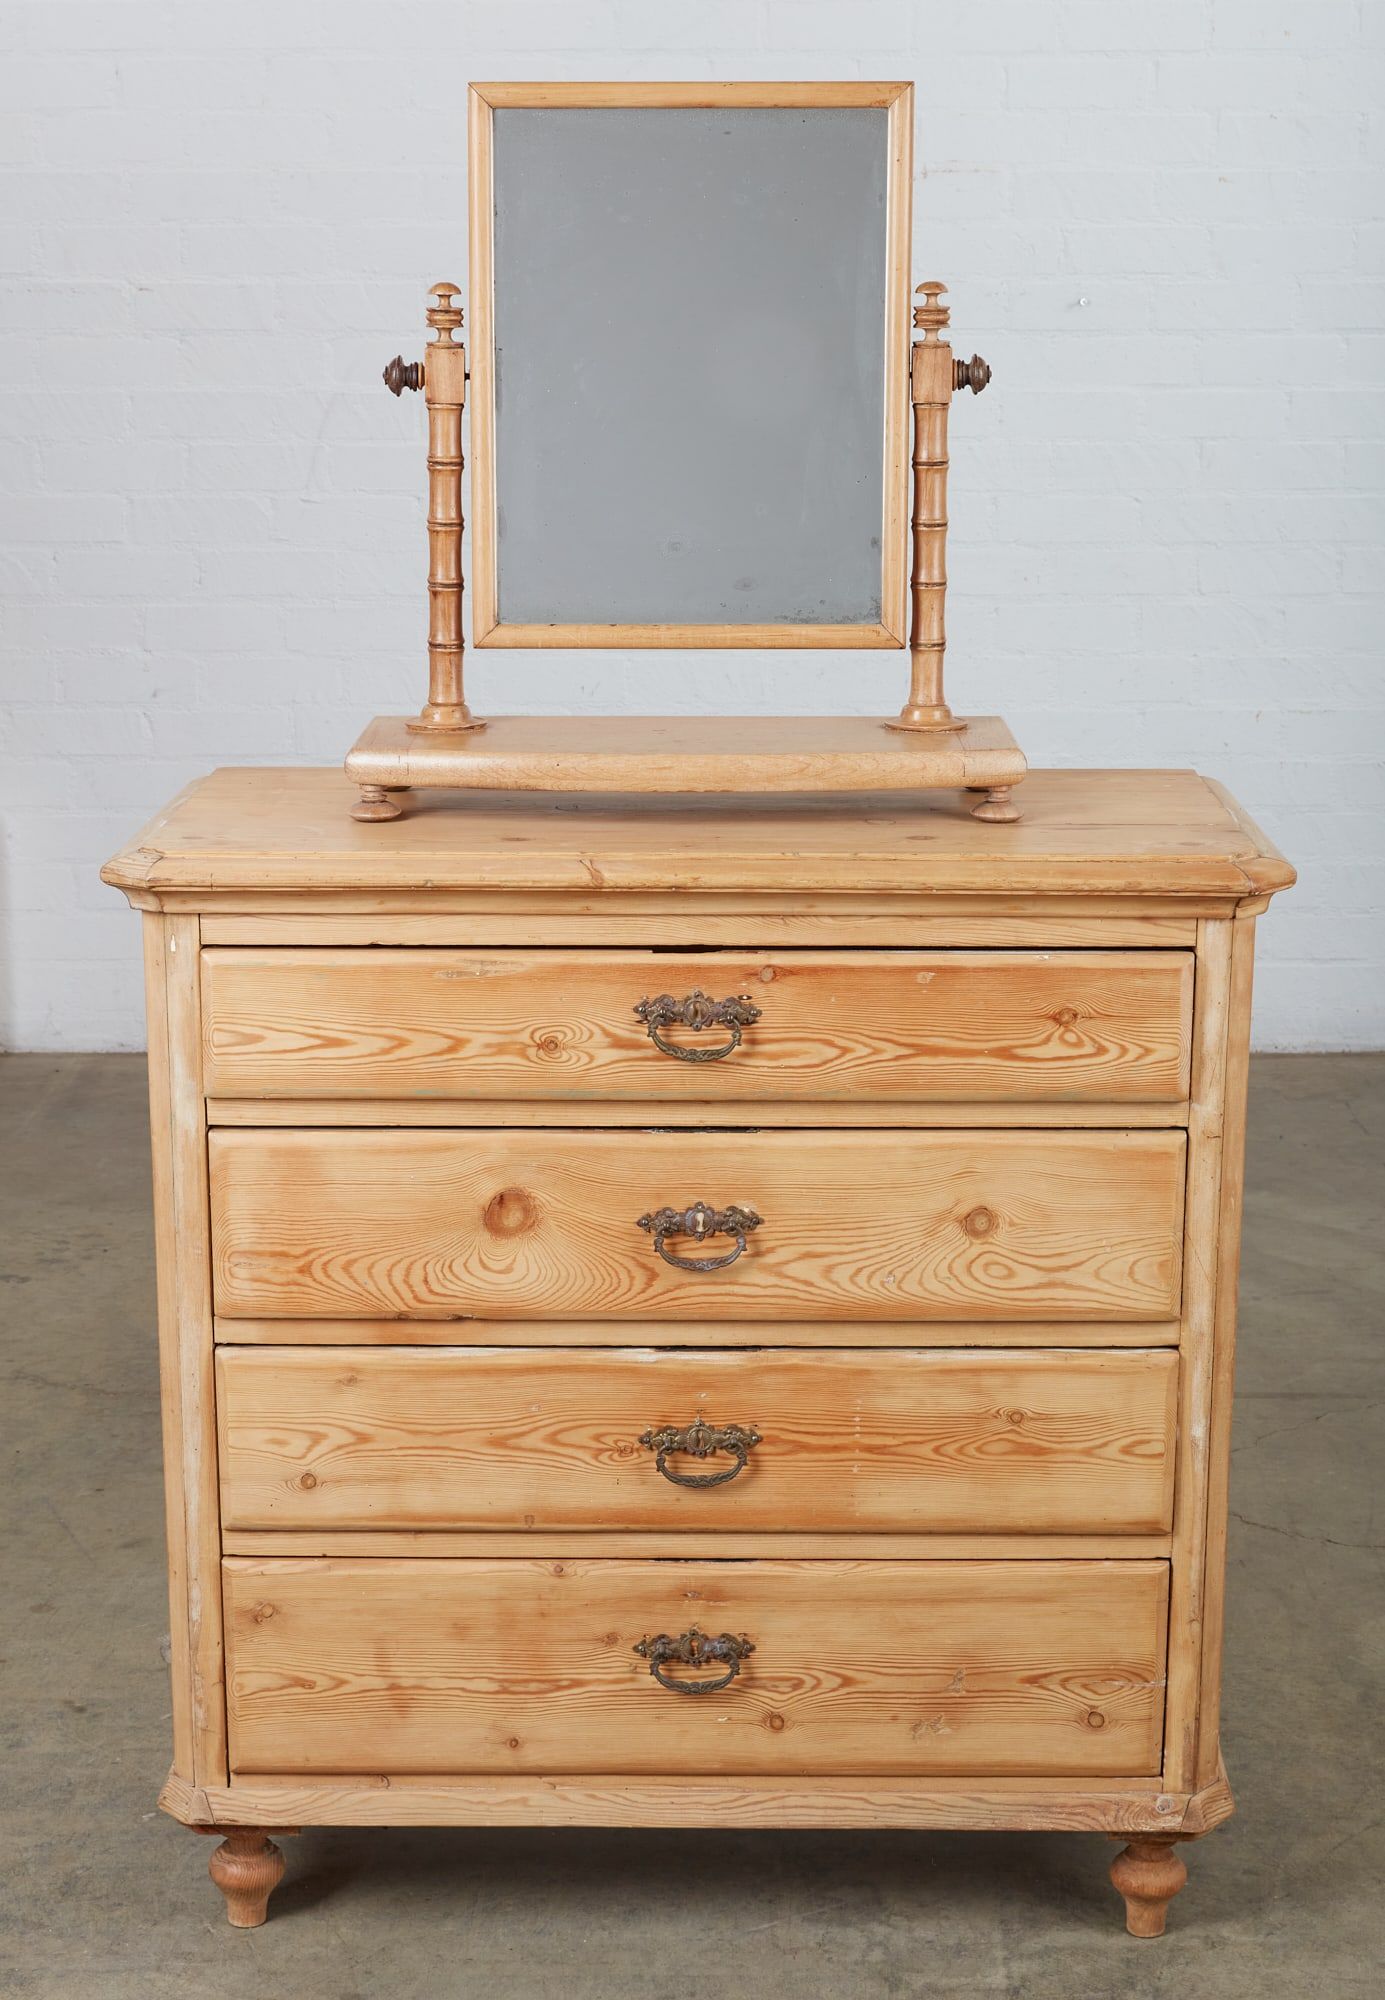 AN AMERICAN PINE CHEST OF DRAWERS  2fb423e